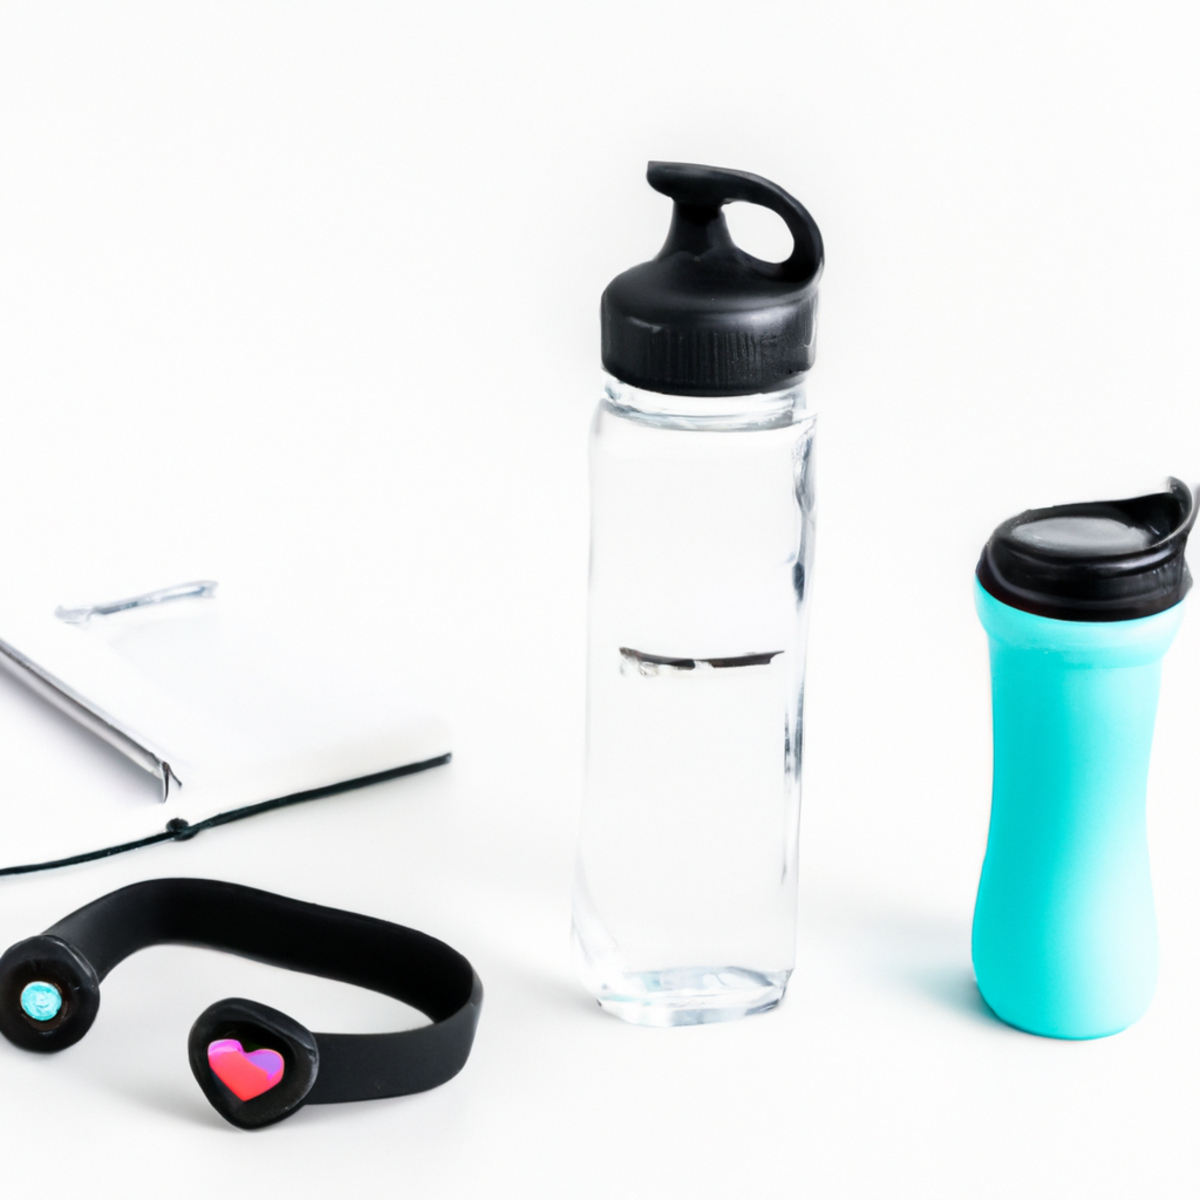 The photo features a sleek fitness tracker watch, a pair of wireless earbuds, and a colorful water bottle arranged neatly on a white background. The fitness tracker displays a heart rate reading and the number of steps taken, while the earbuds are nestled in their charging case. The water bottle is adorned with motivational phrases and a measurement guide to encourage hydration during workouts. The objects exude a sense of modernity and convenience, highlighting the accessibility and fun of using fitness apps and wearables to enhance one's fitness journey.